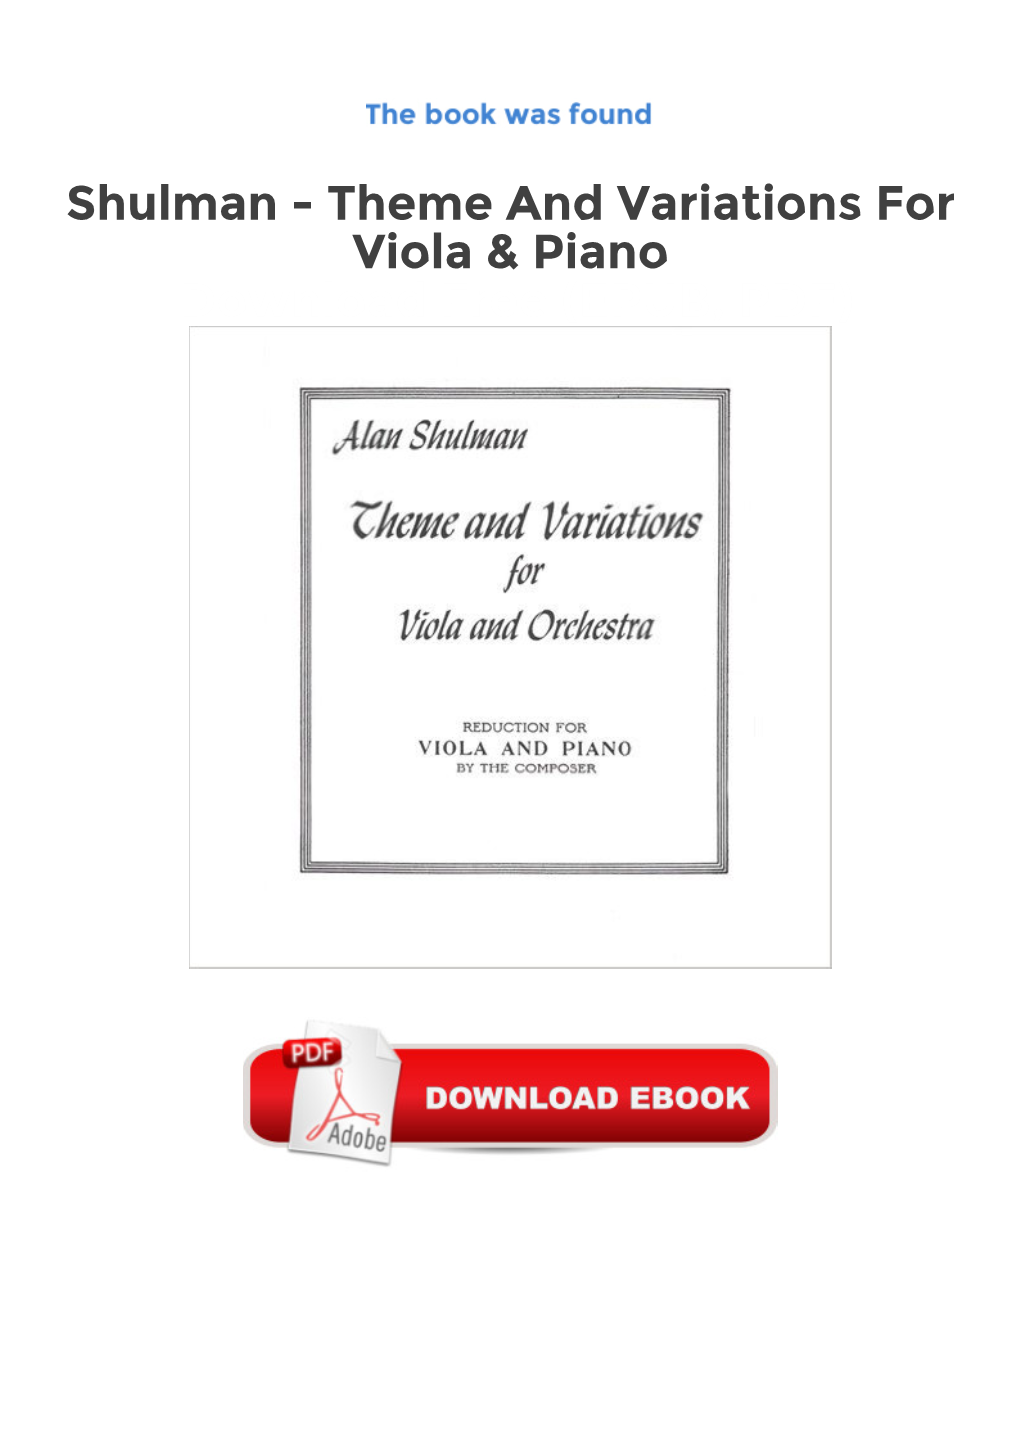 Shulman - Theme and Variations for Viola & Piano Download Free (EPUB, PDF) Shulman - Theme and Variations for Viola & Piano